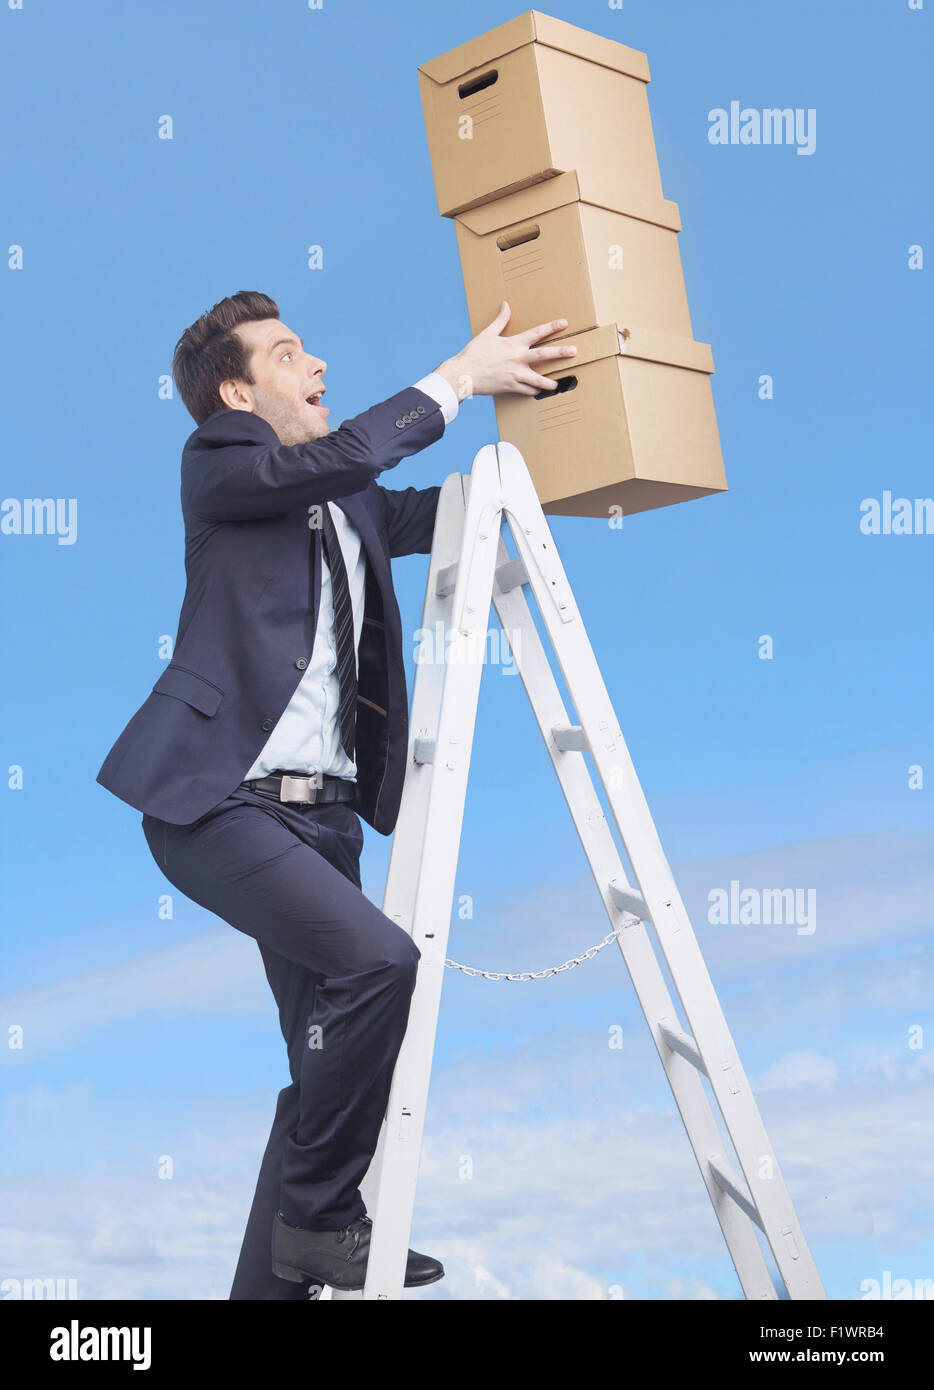 Young banker loosing the boxes Stock Photo